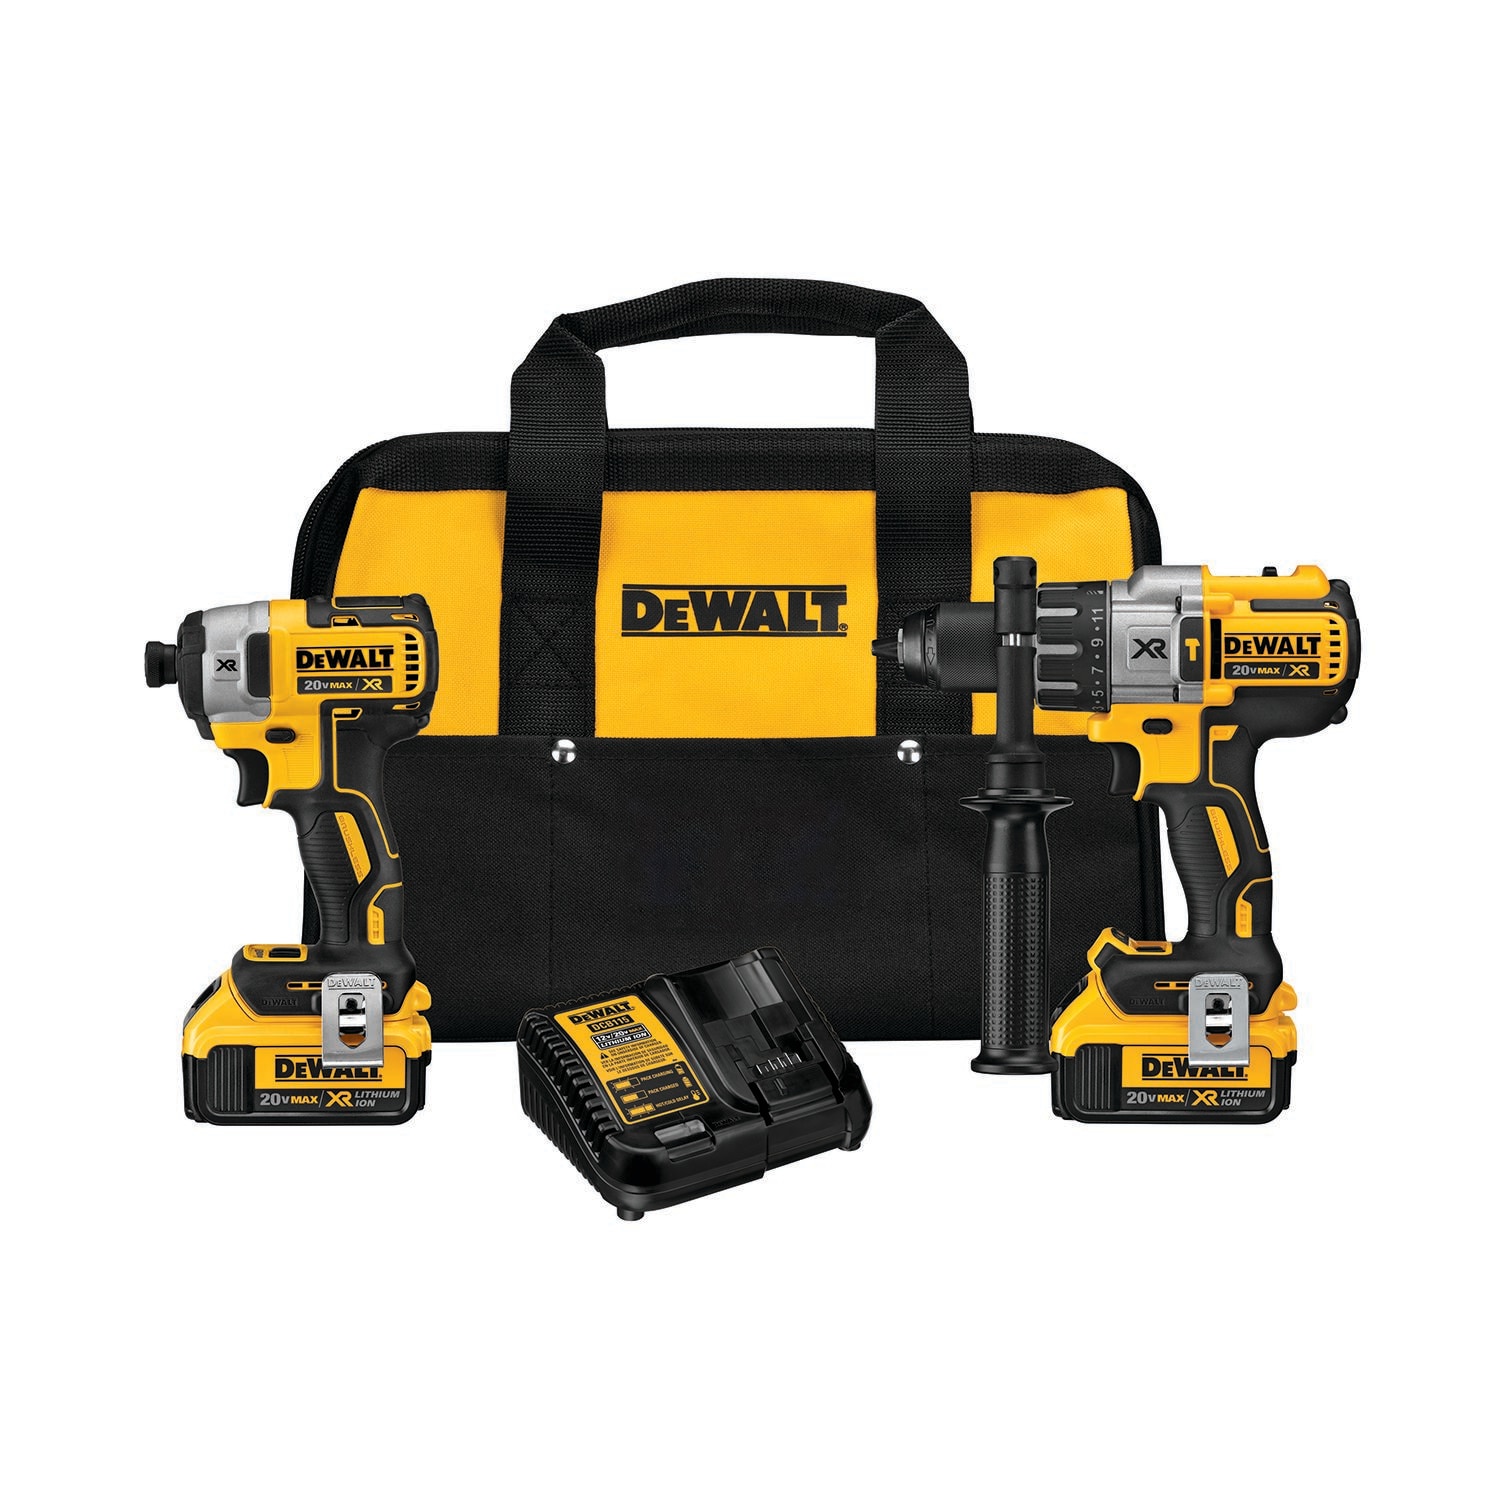 DEWALT XR 3-Tool 20-Volt Max Brushless Power Tool Combo Kit with